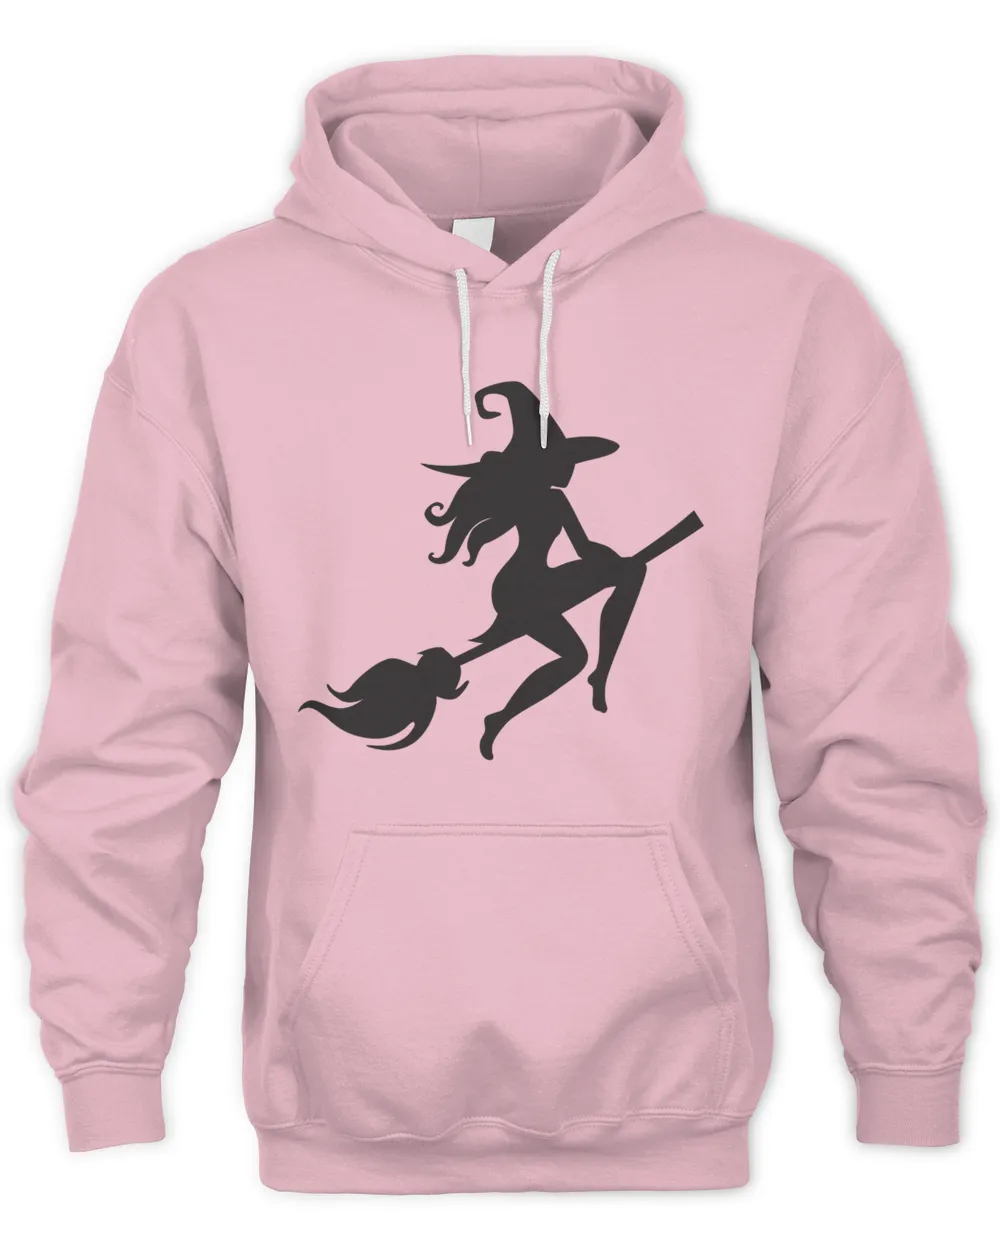 Witch riding broom t shirt hoodie sweater